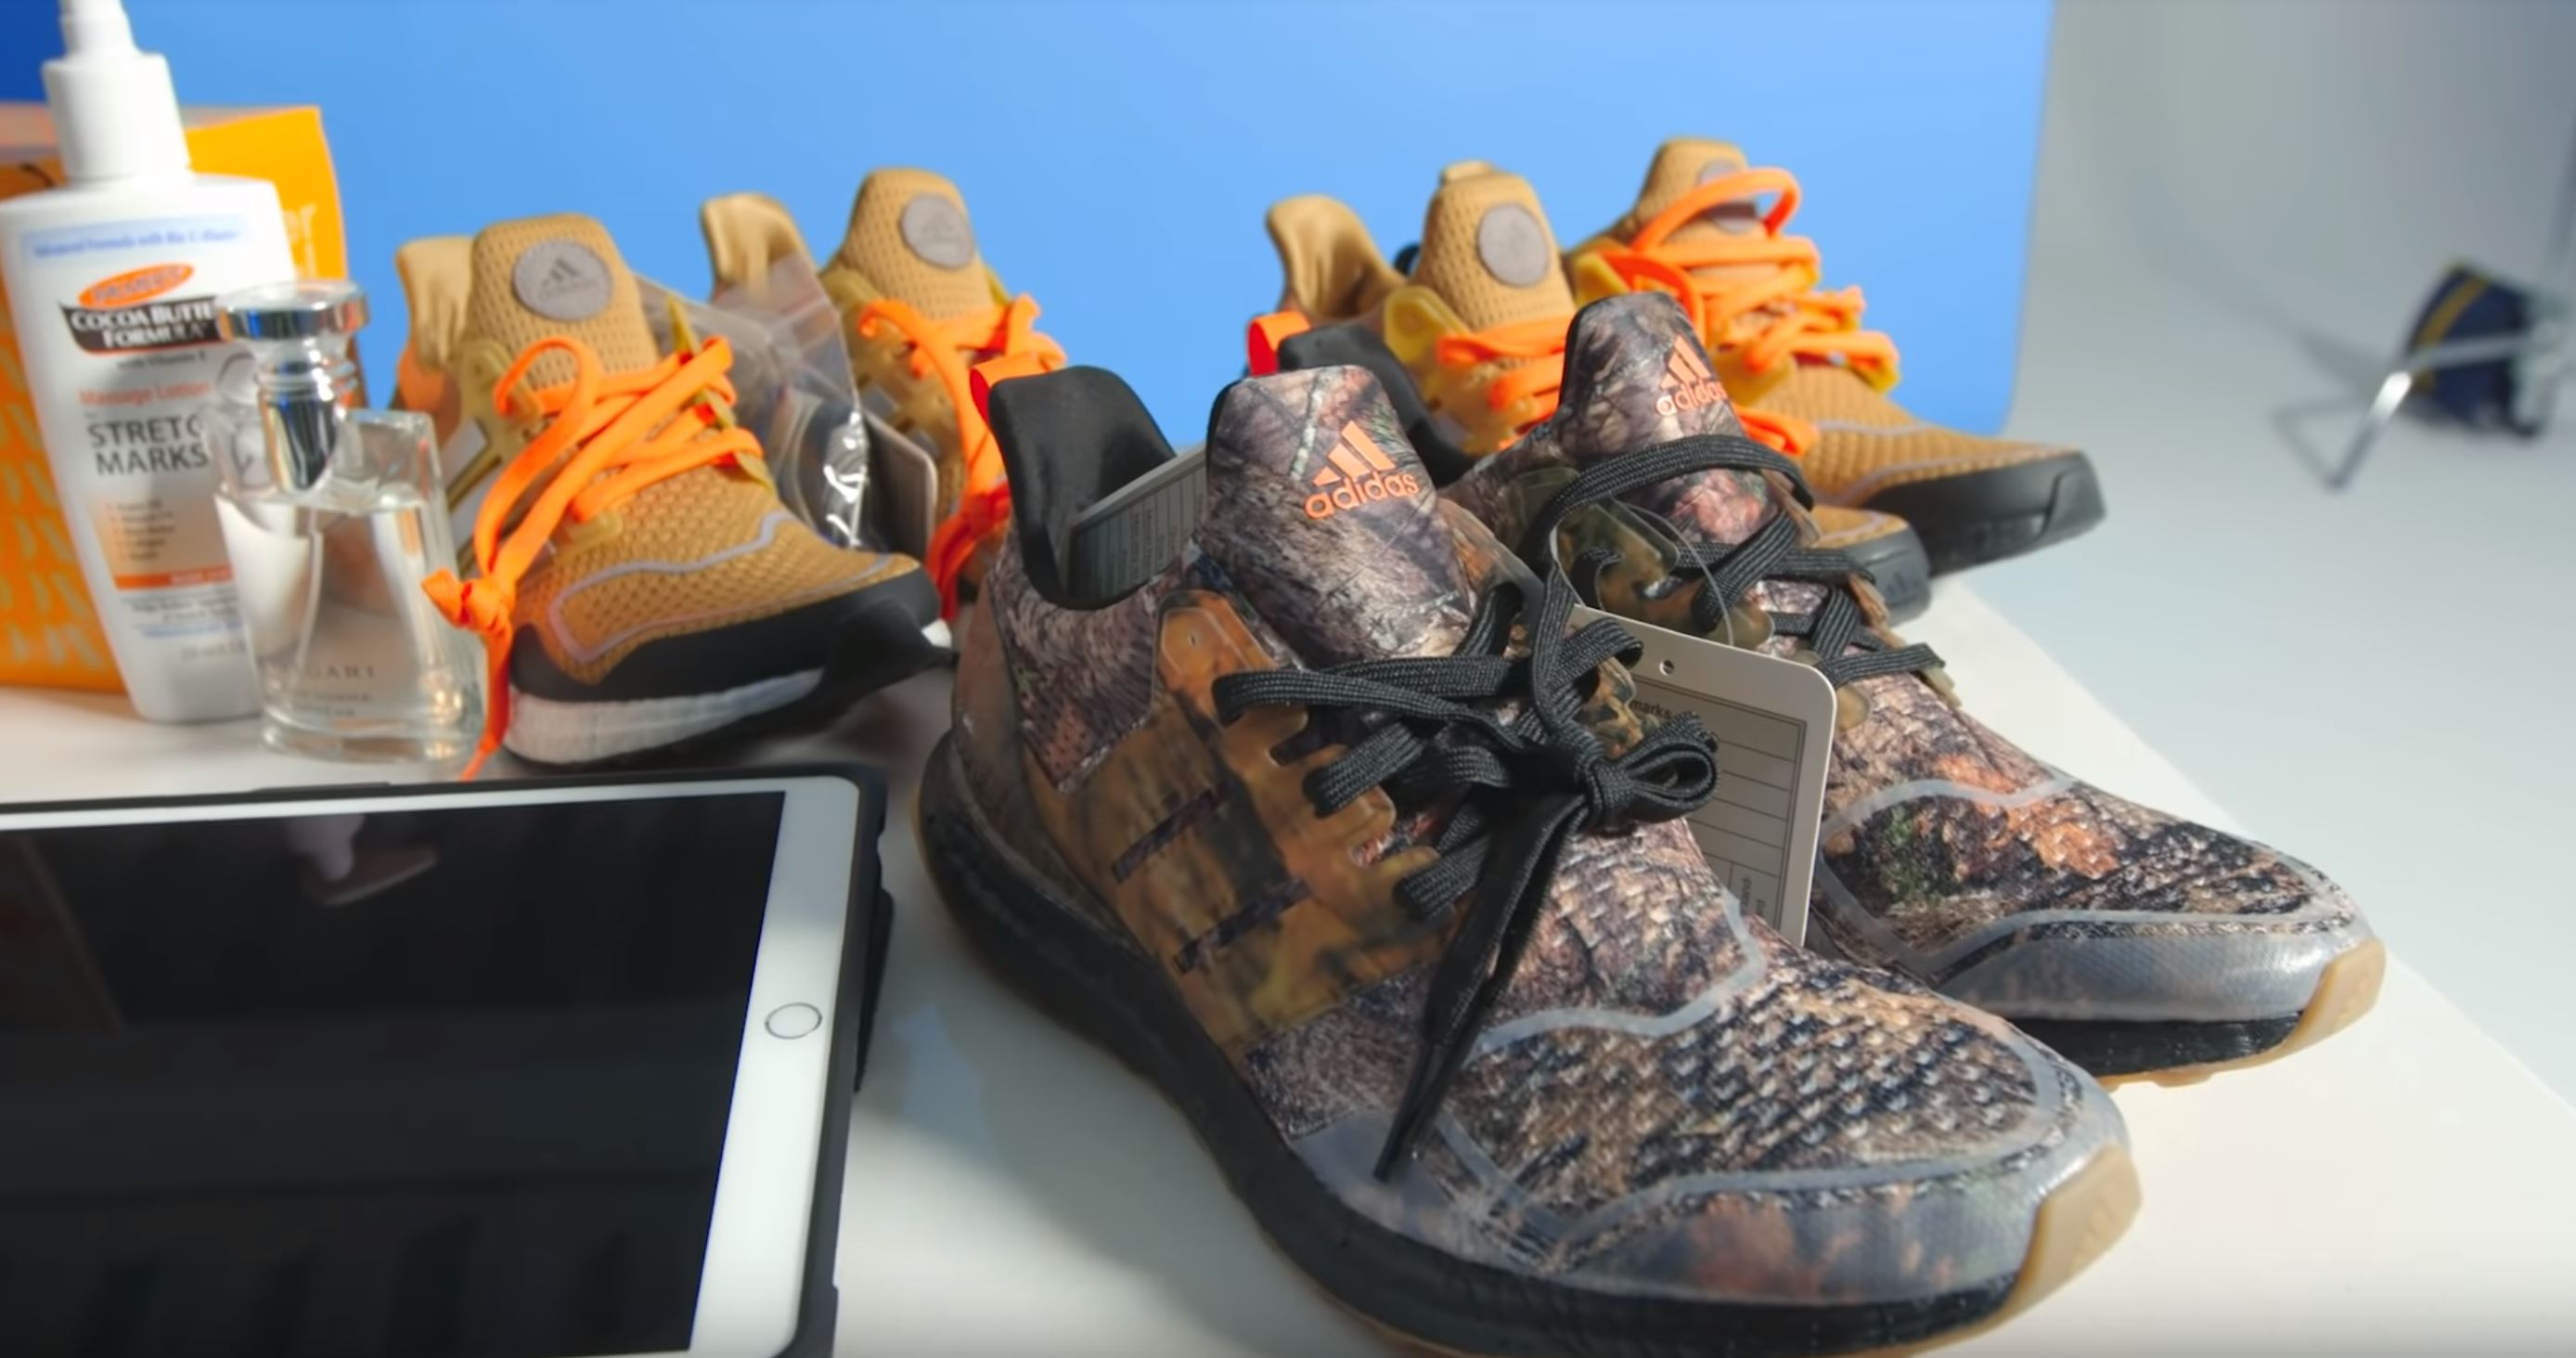 The Action Bronson Ultra Boost Collab 